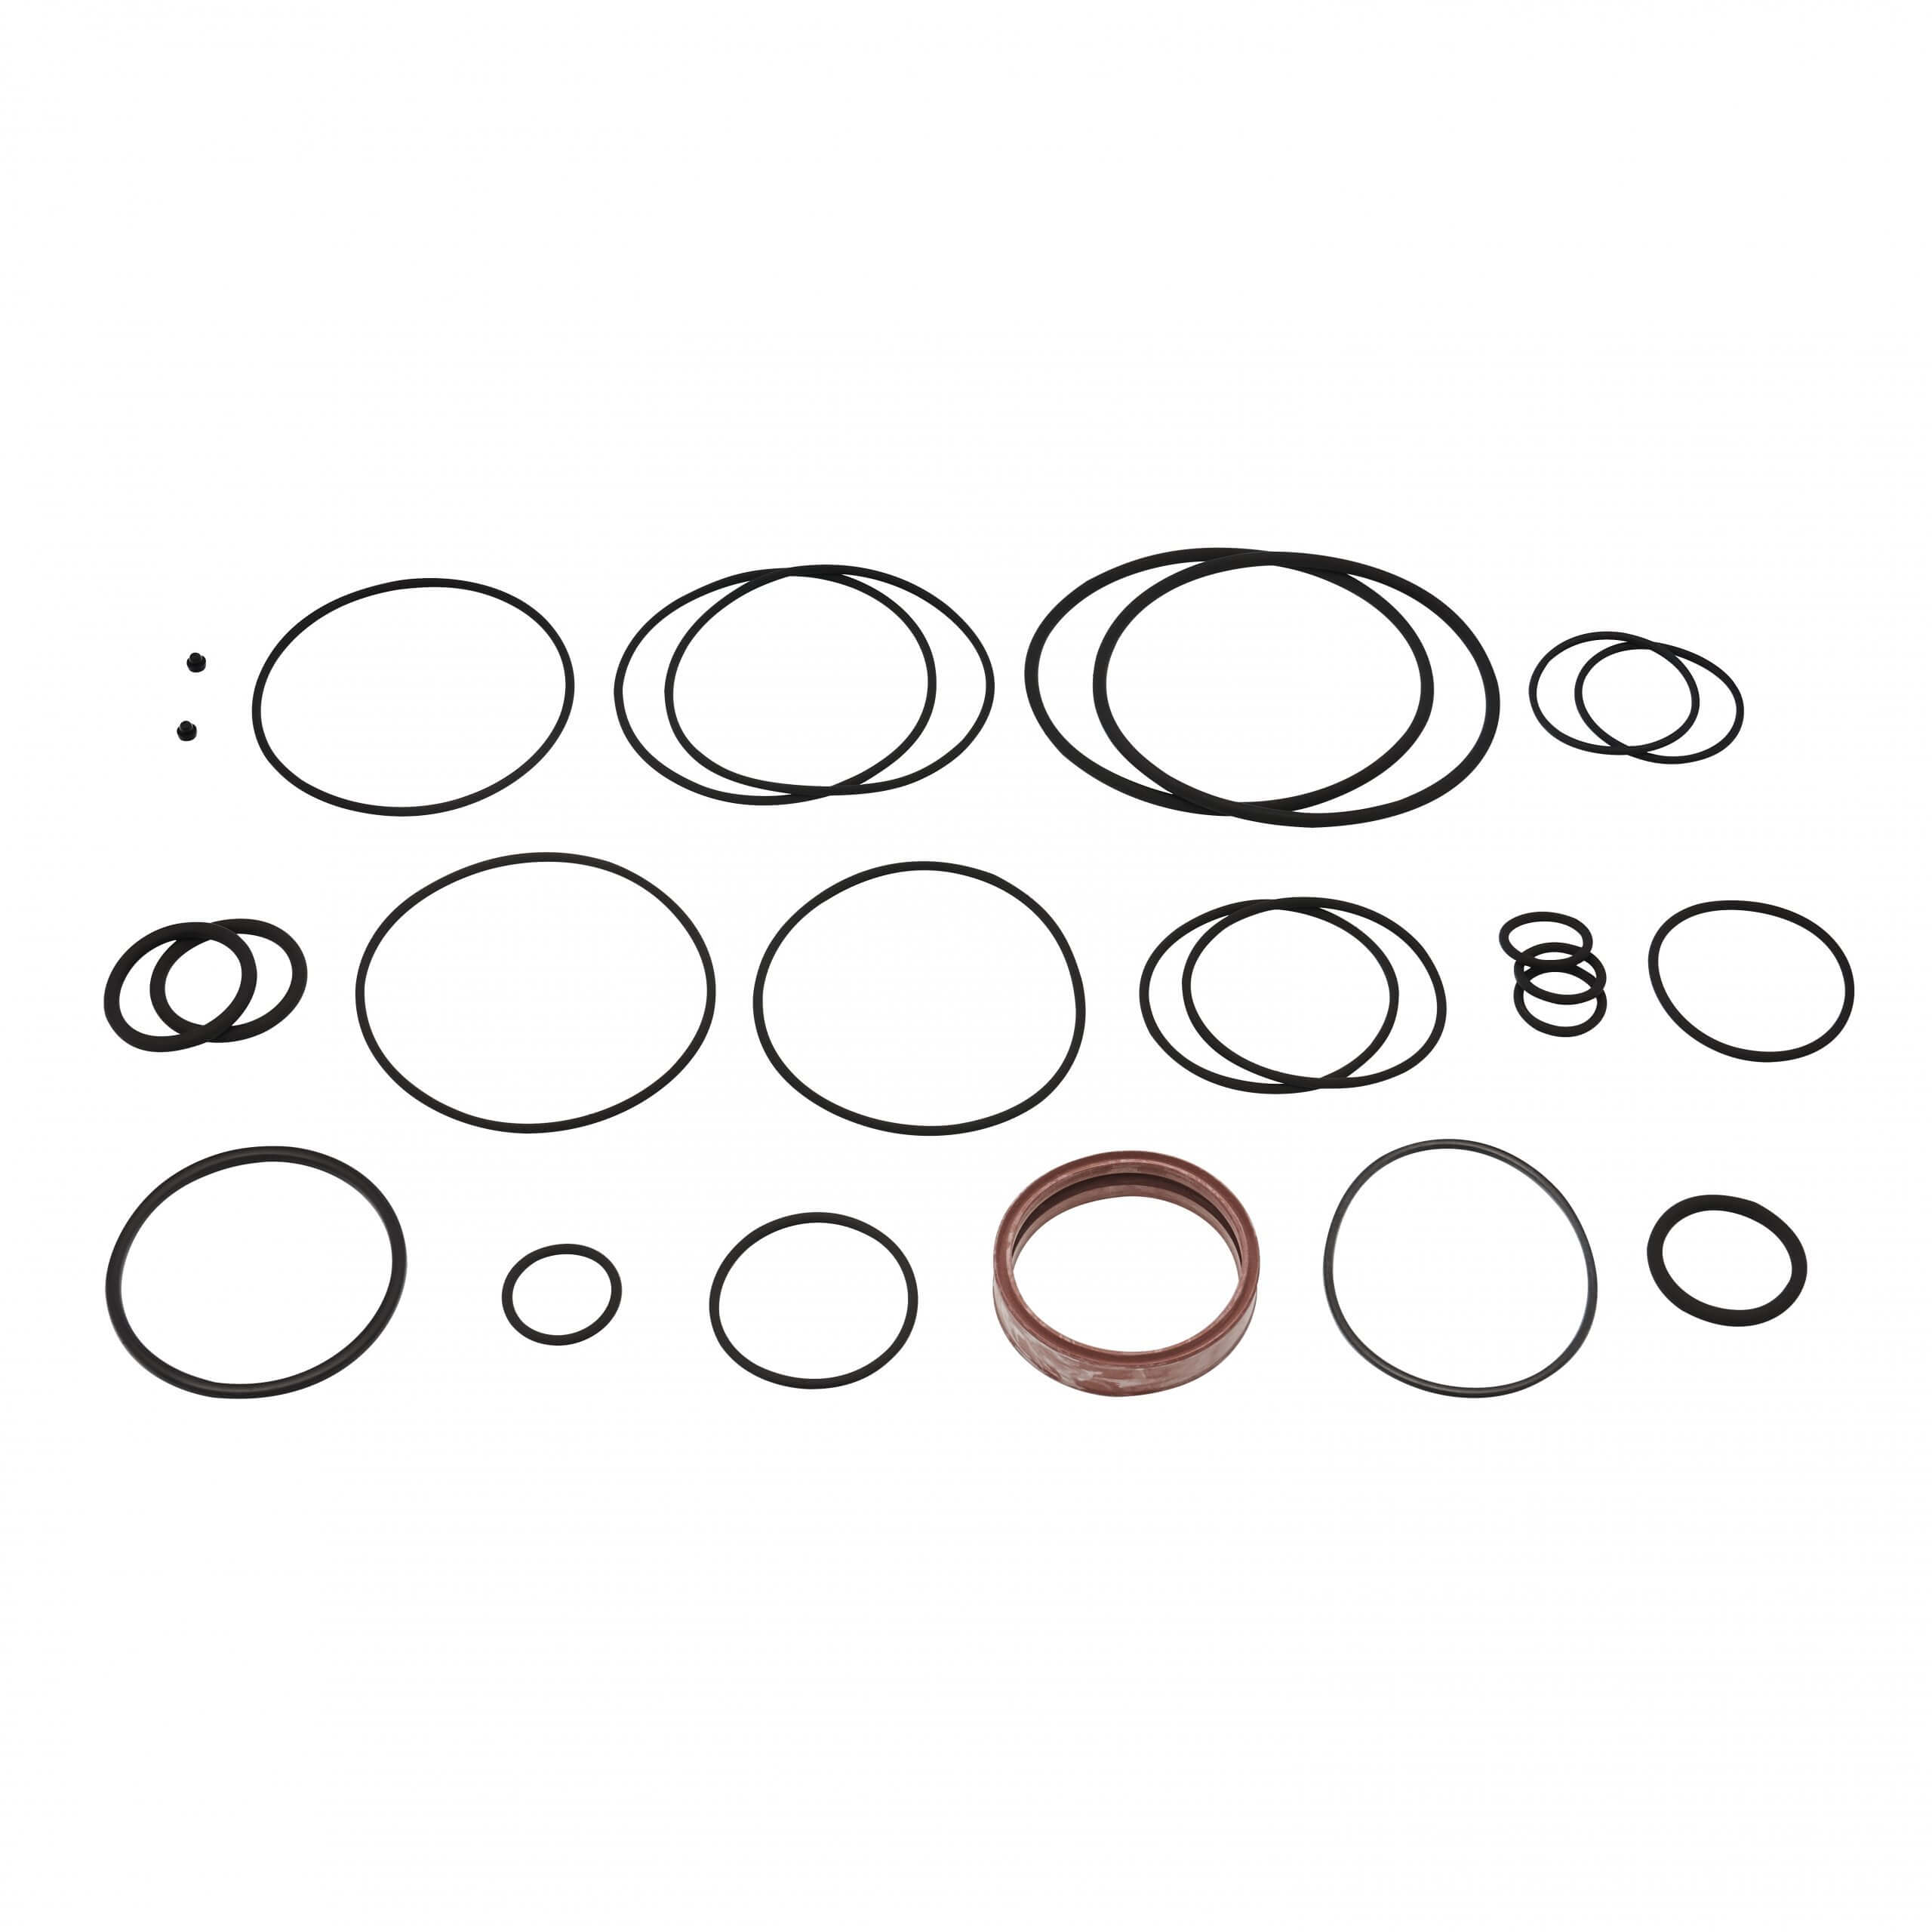 Filters - Gaskets 2